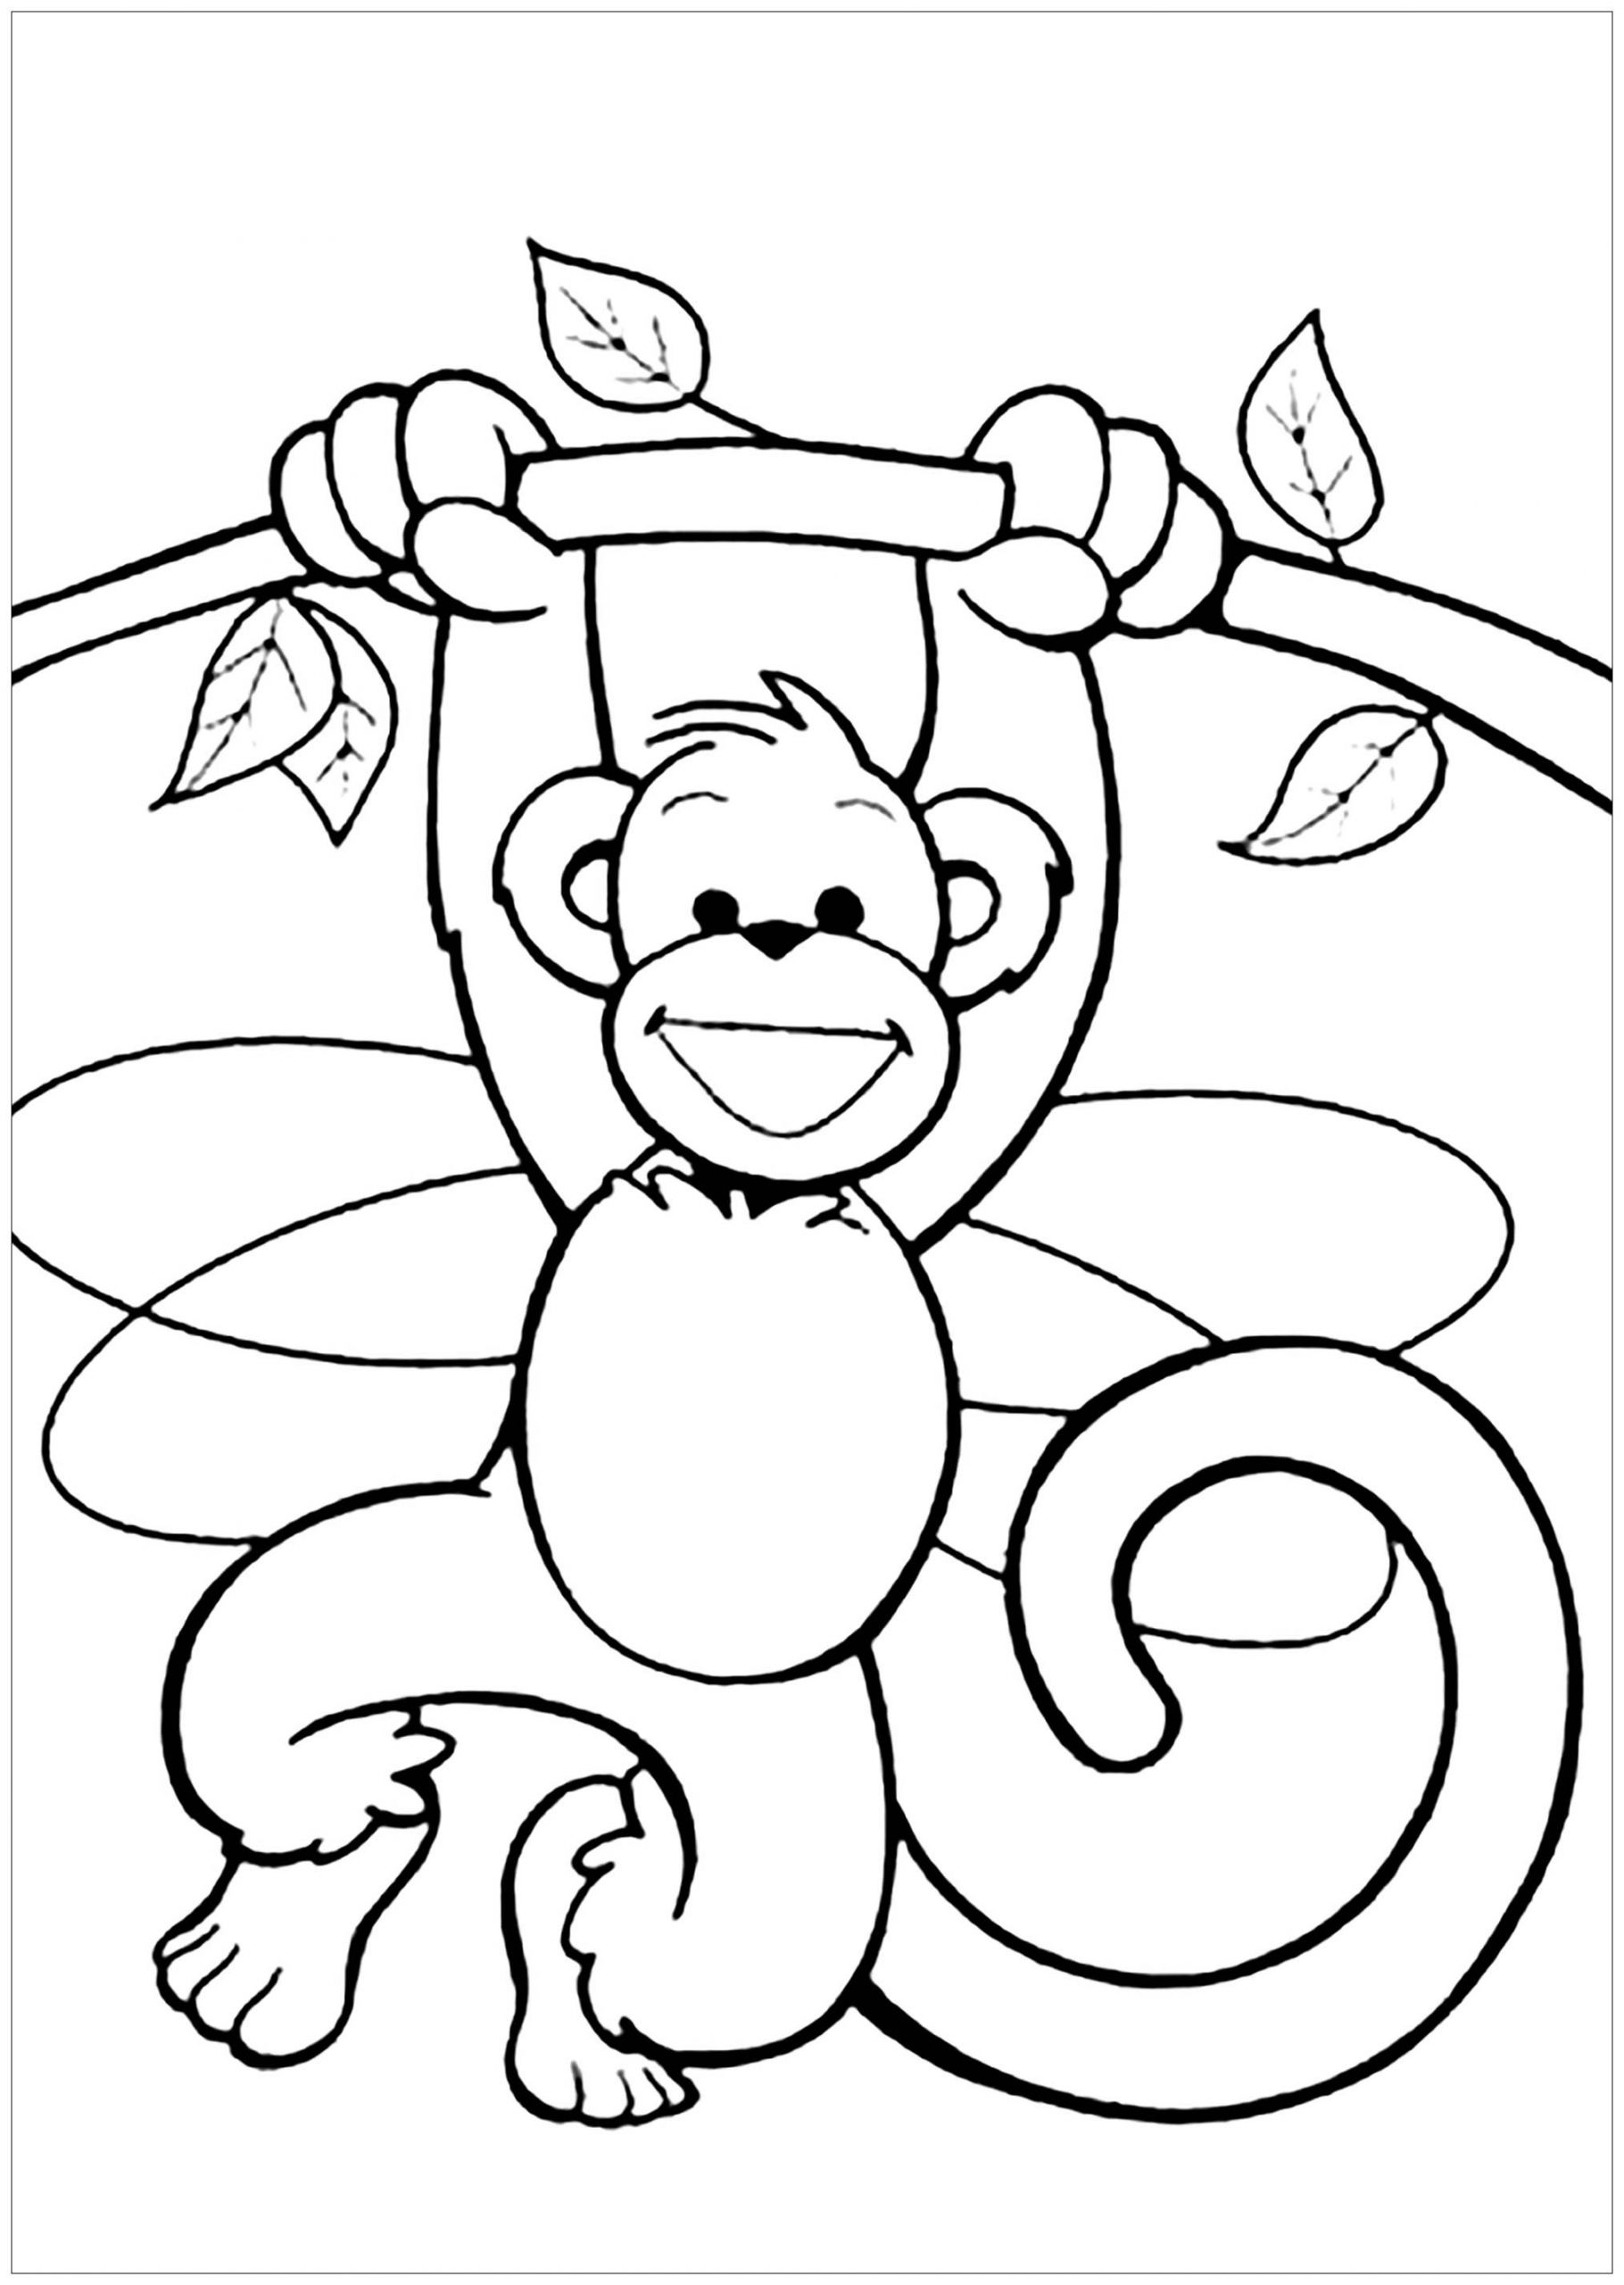 Printable Coloring Pages For Kids
 Monkeys to for free Monkeys Kids Coloring Pages